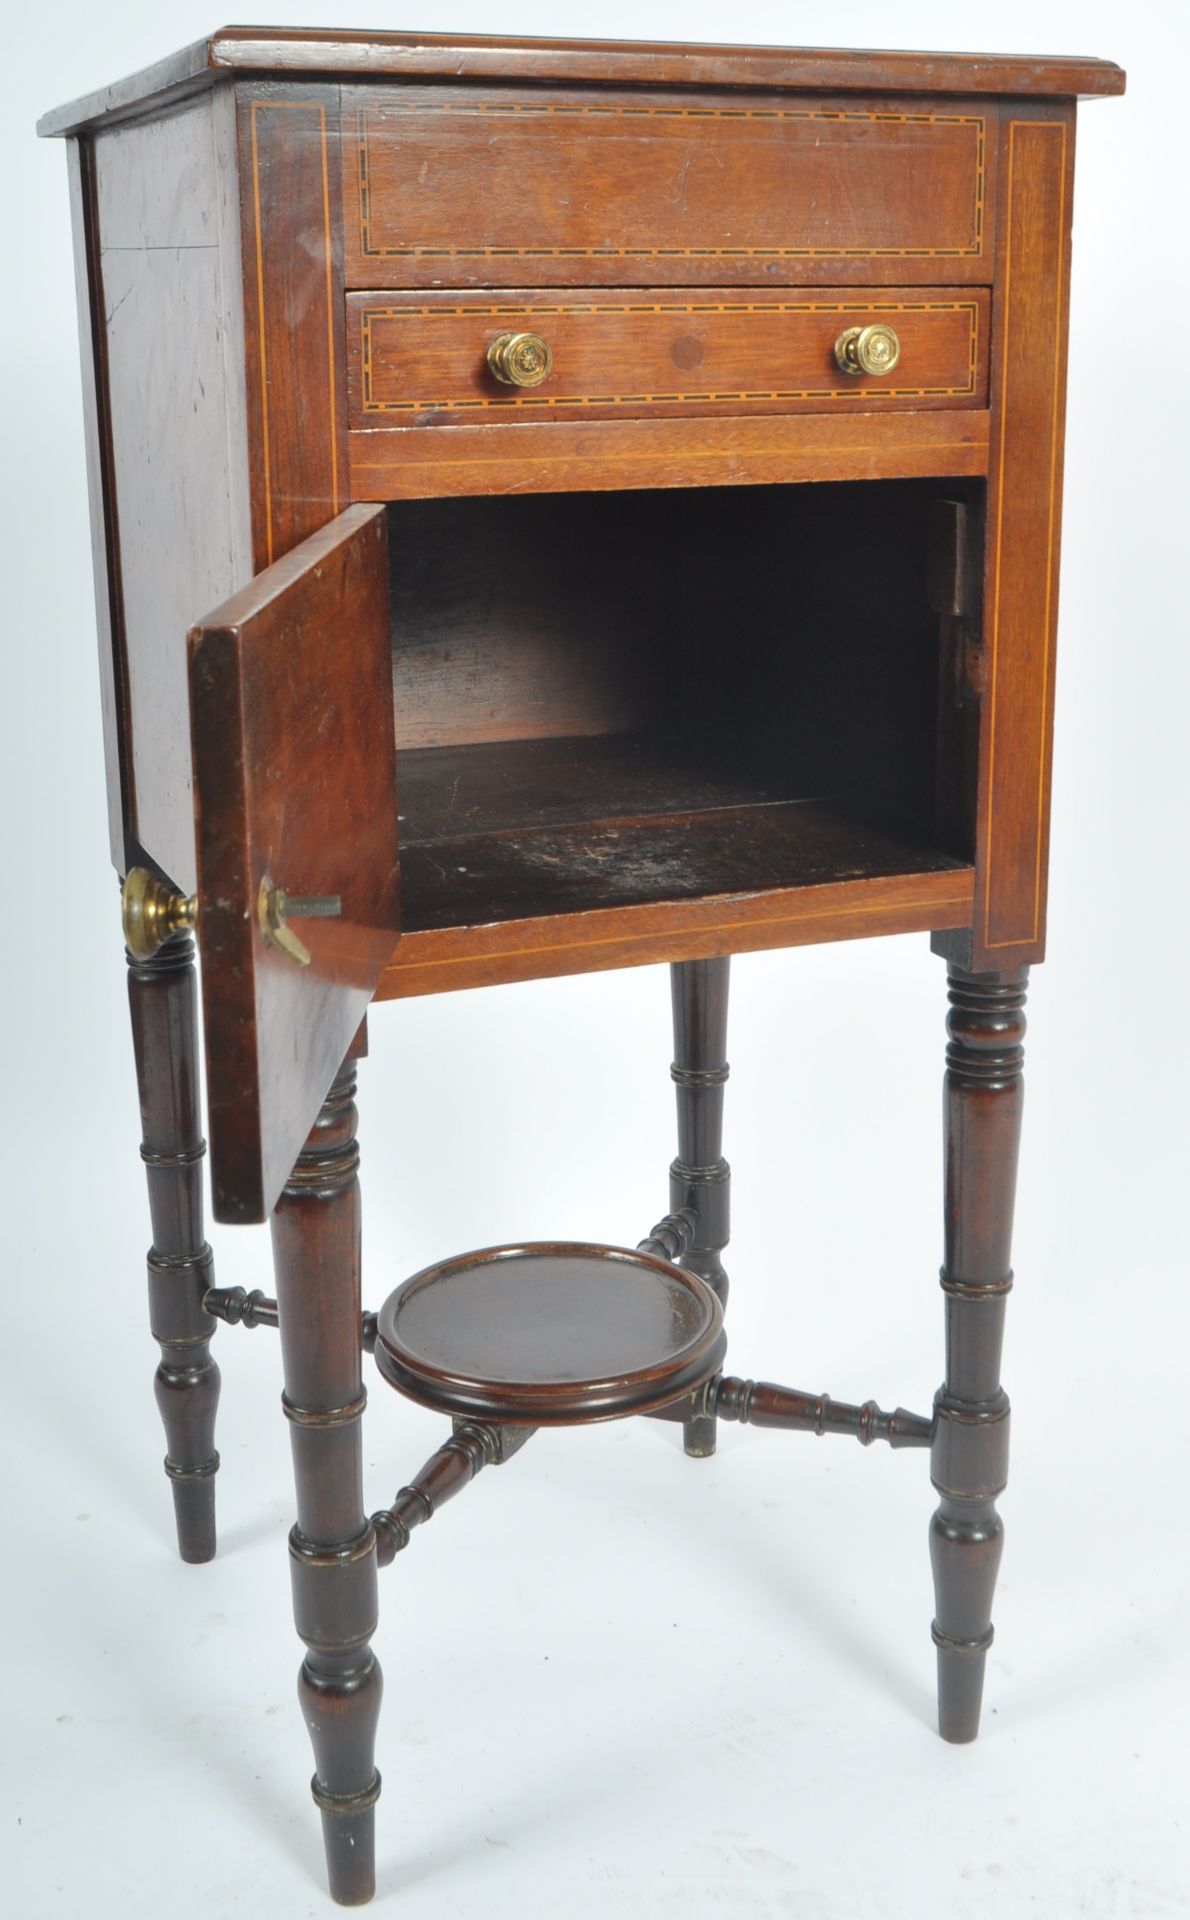 LATE 19TH CENTURY VICTORIAN POT CUPBOARD - Image 5 of 6